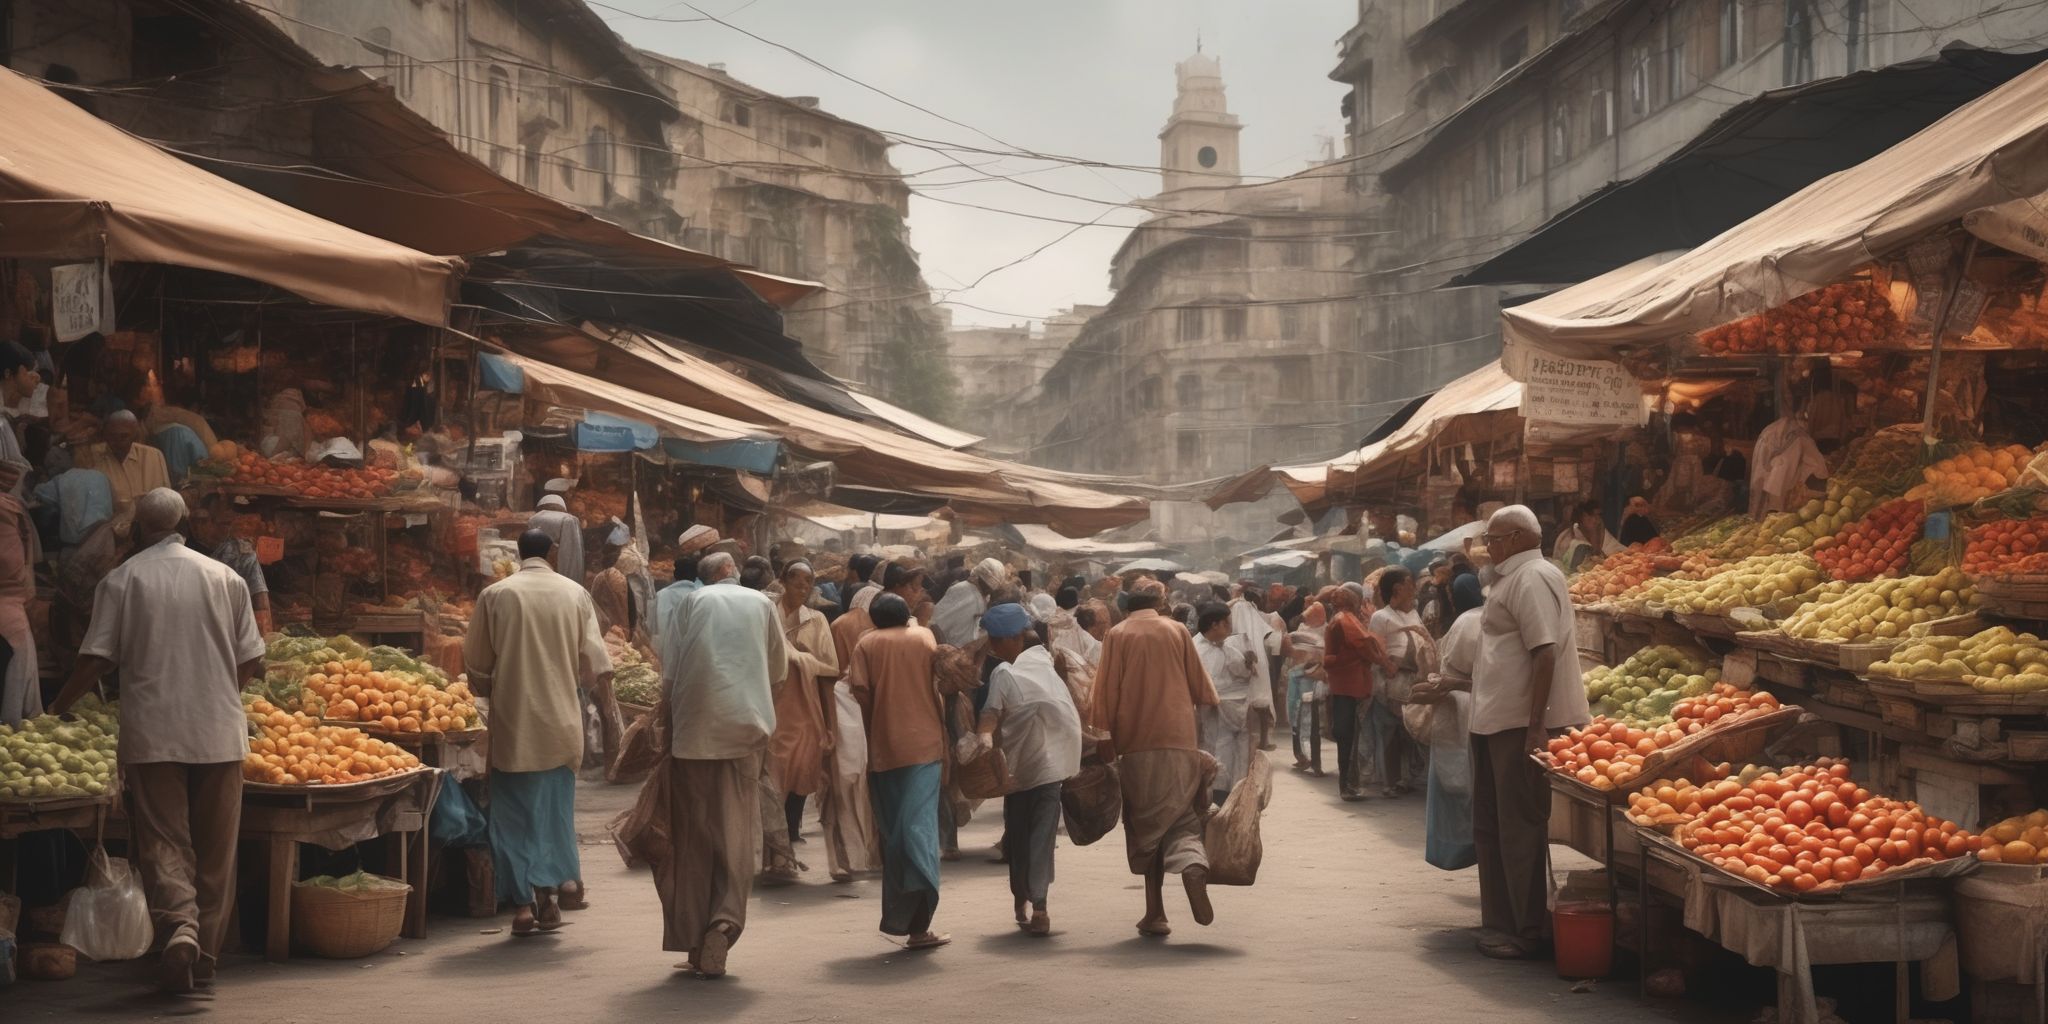 Market  in realistic, photographic style